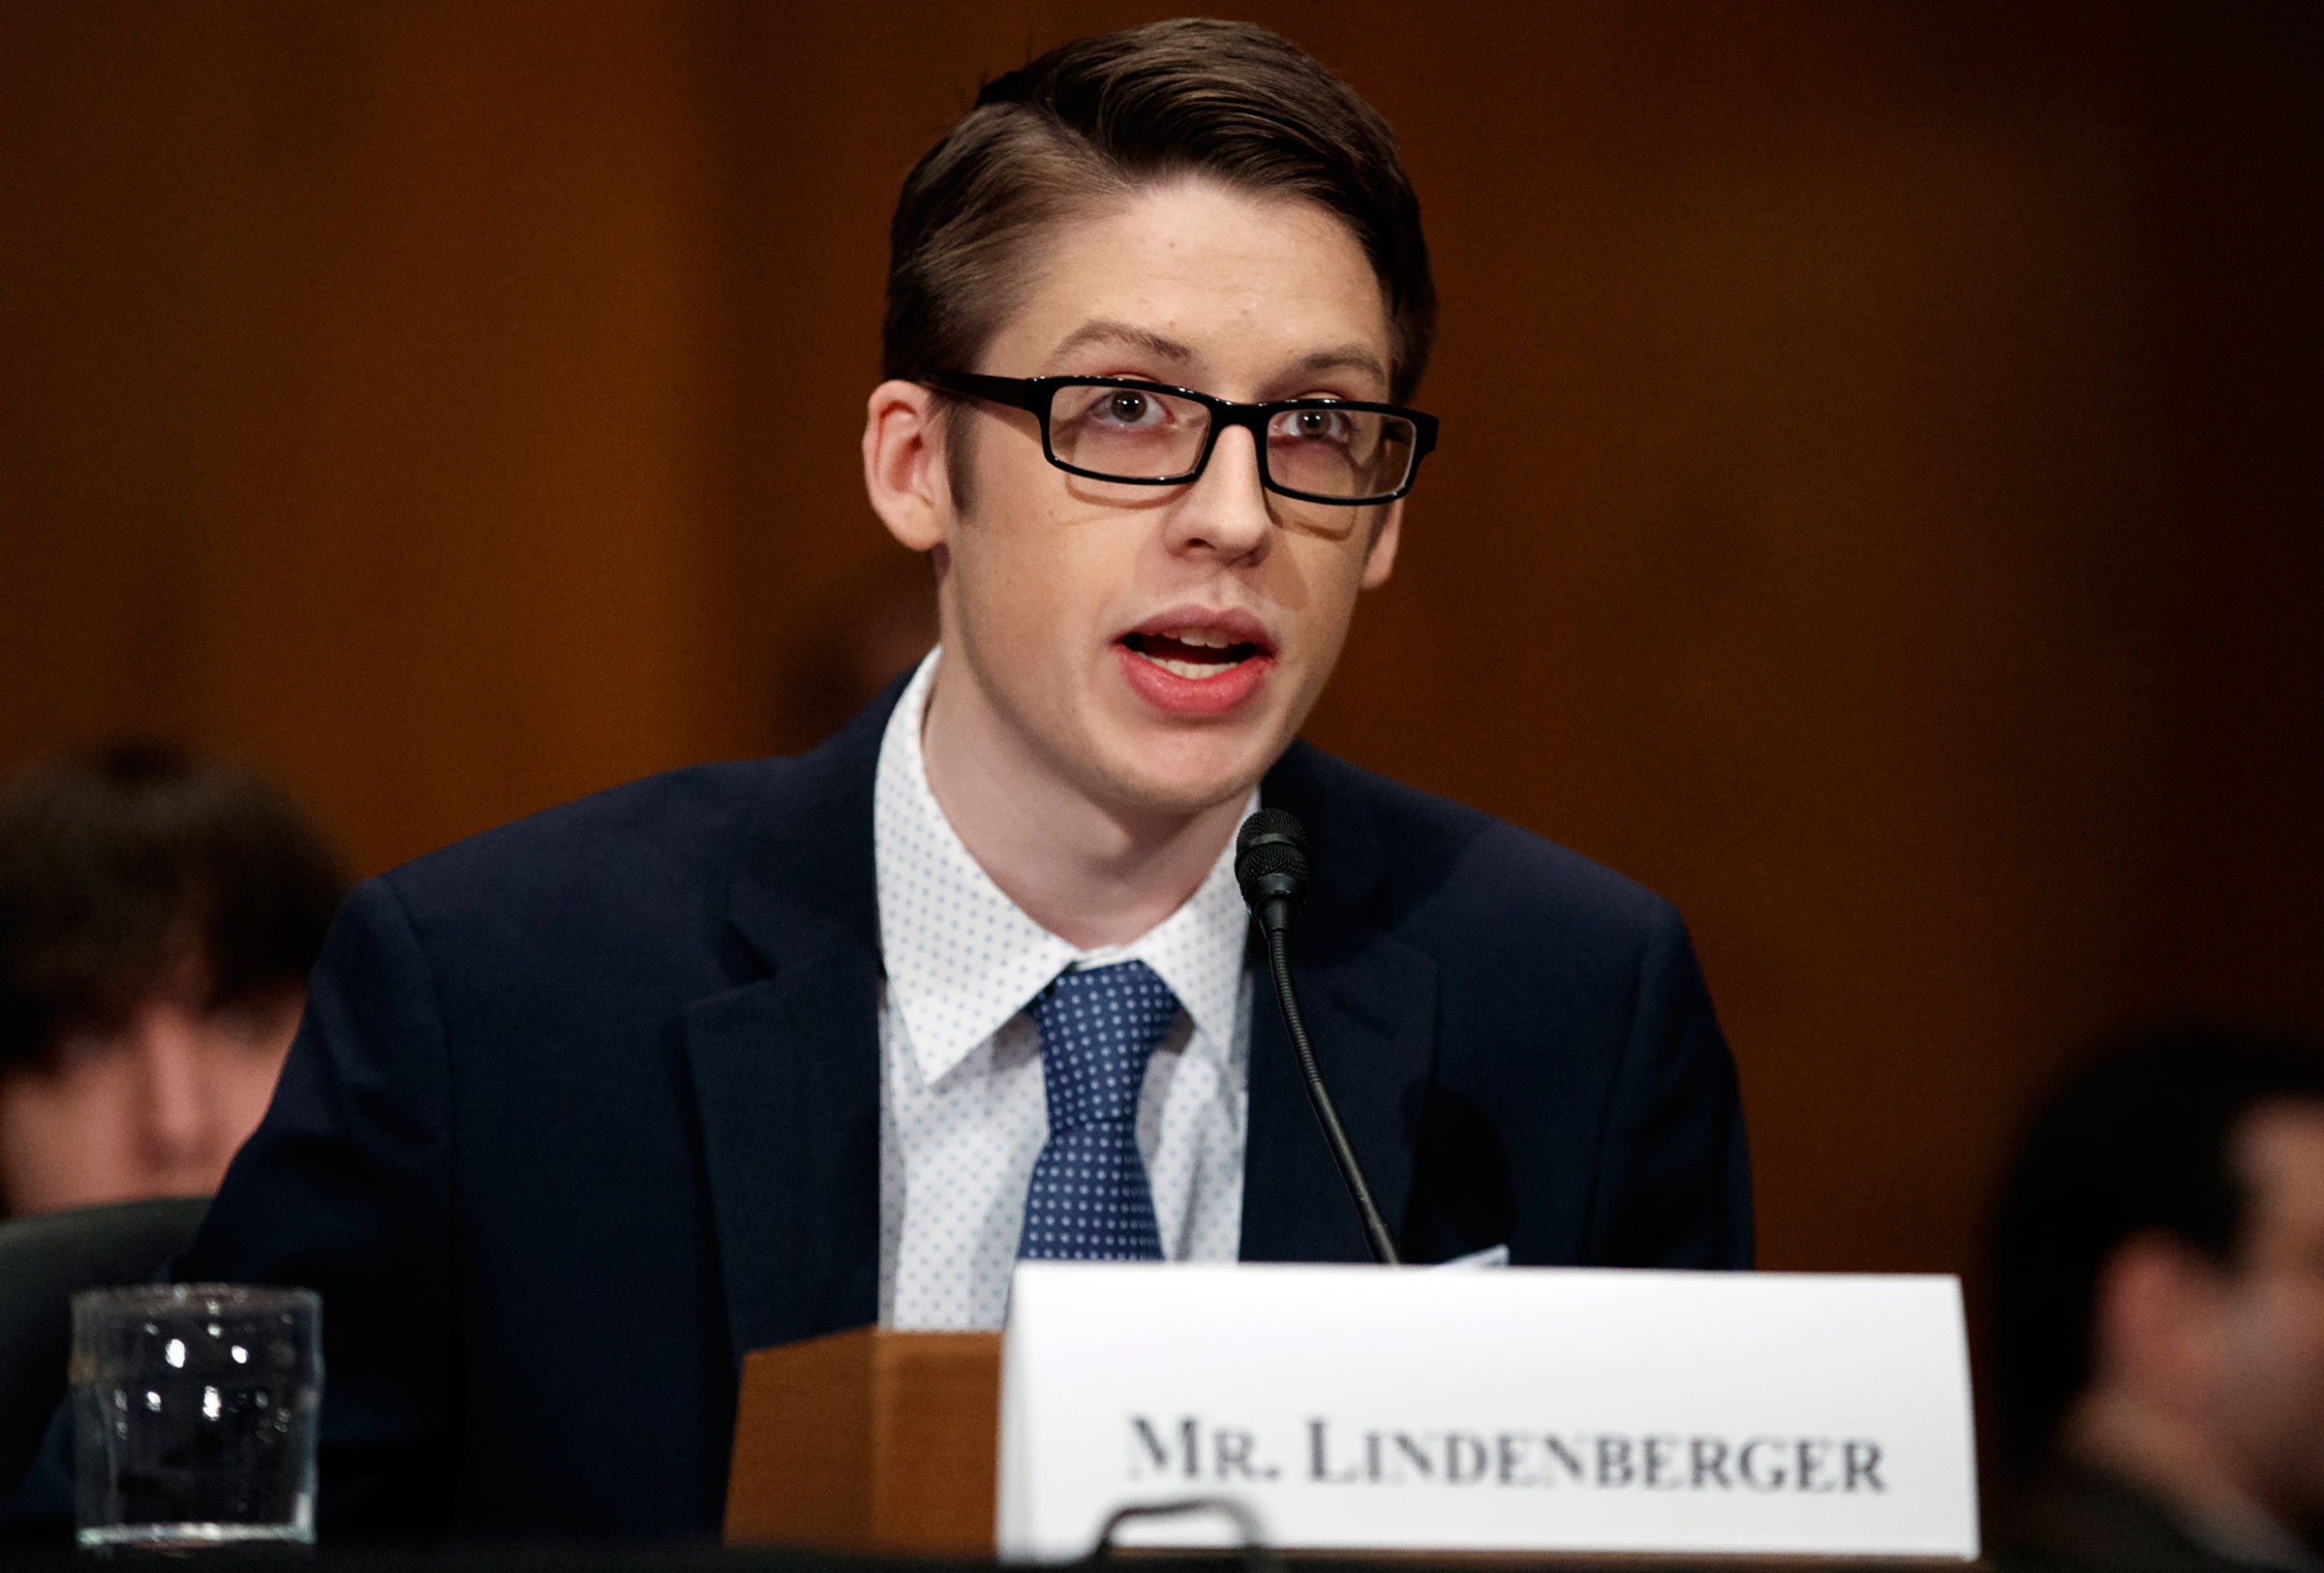 Ethan Lindenberger, 18, testifies before a Senate committee about getting ­vaccinated against his parents’ wishes on March 5. (Carolyn Kaster—AP)